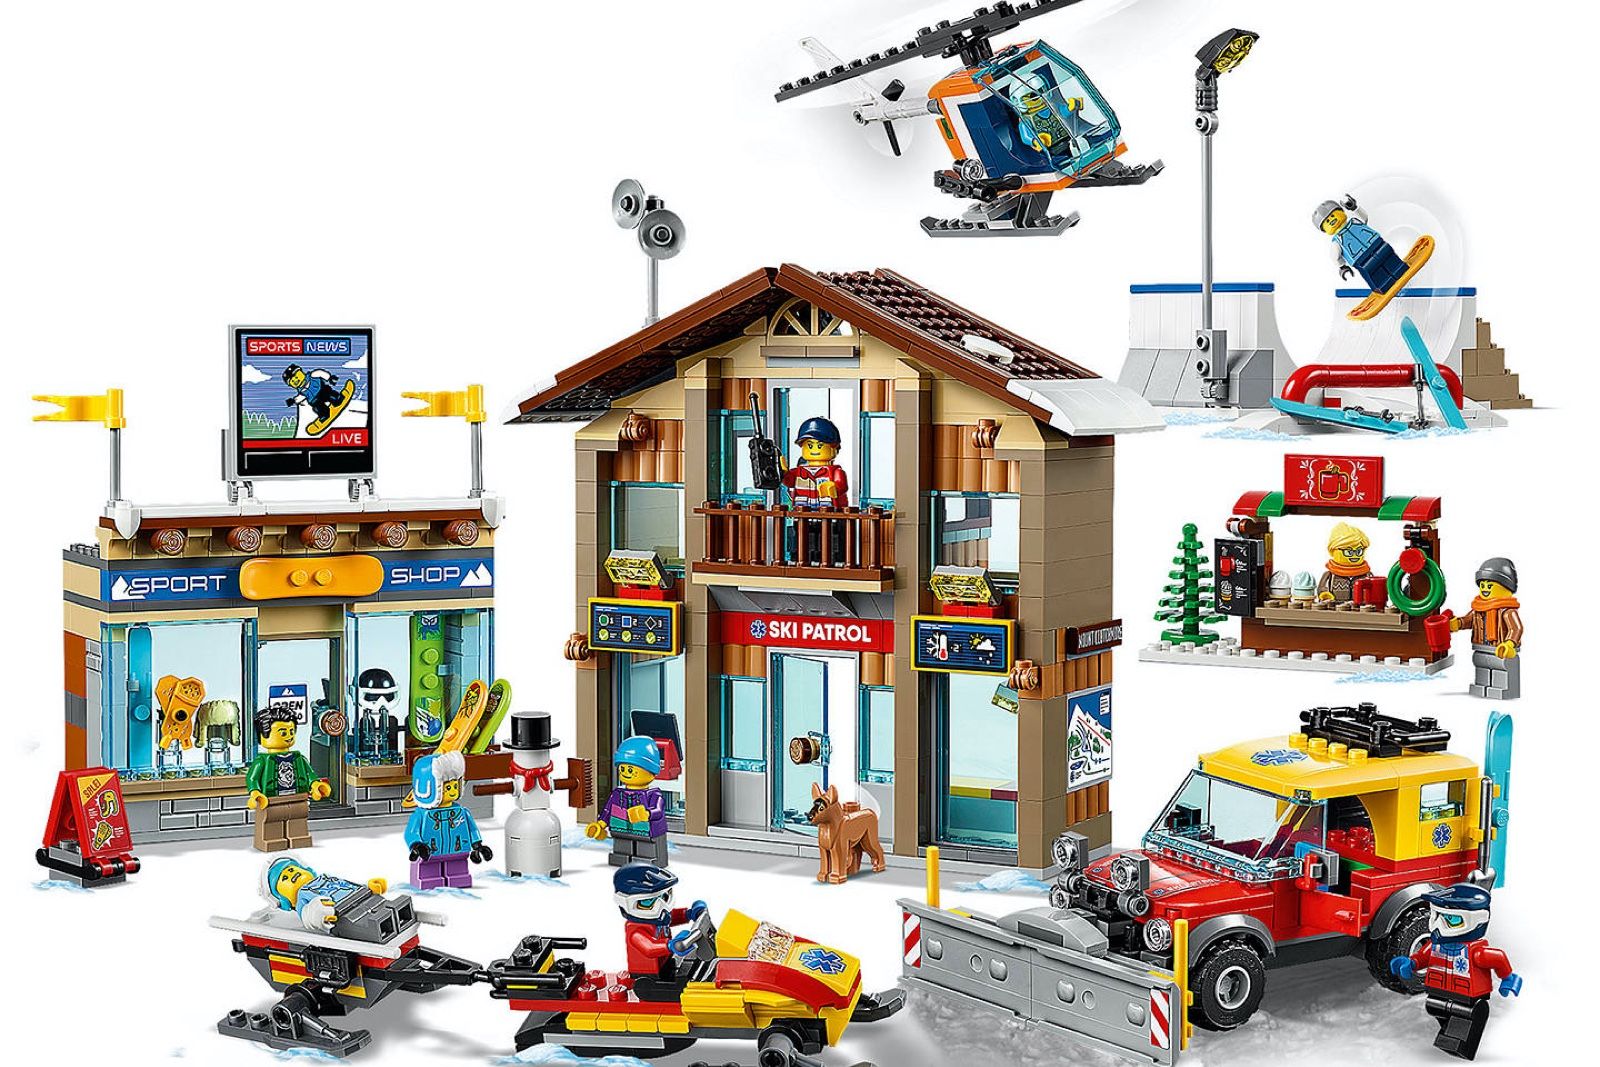 10 best Lego sets 2020 Our favourite Star Wars, Technic, City, Frozen II sets and more image 8